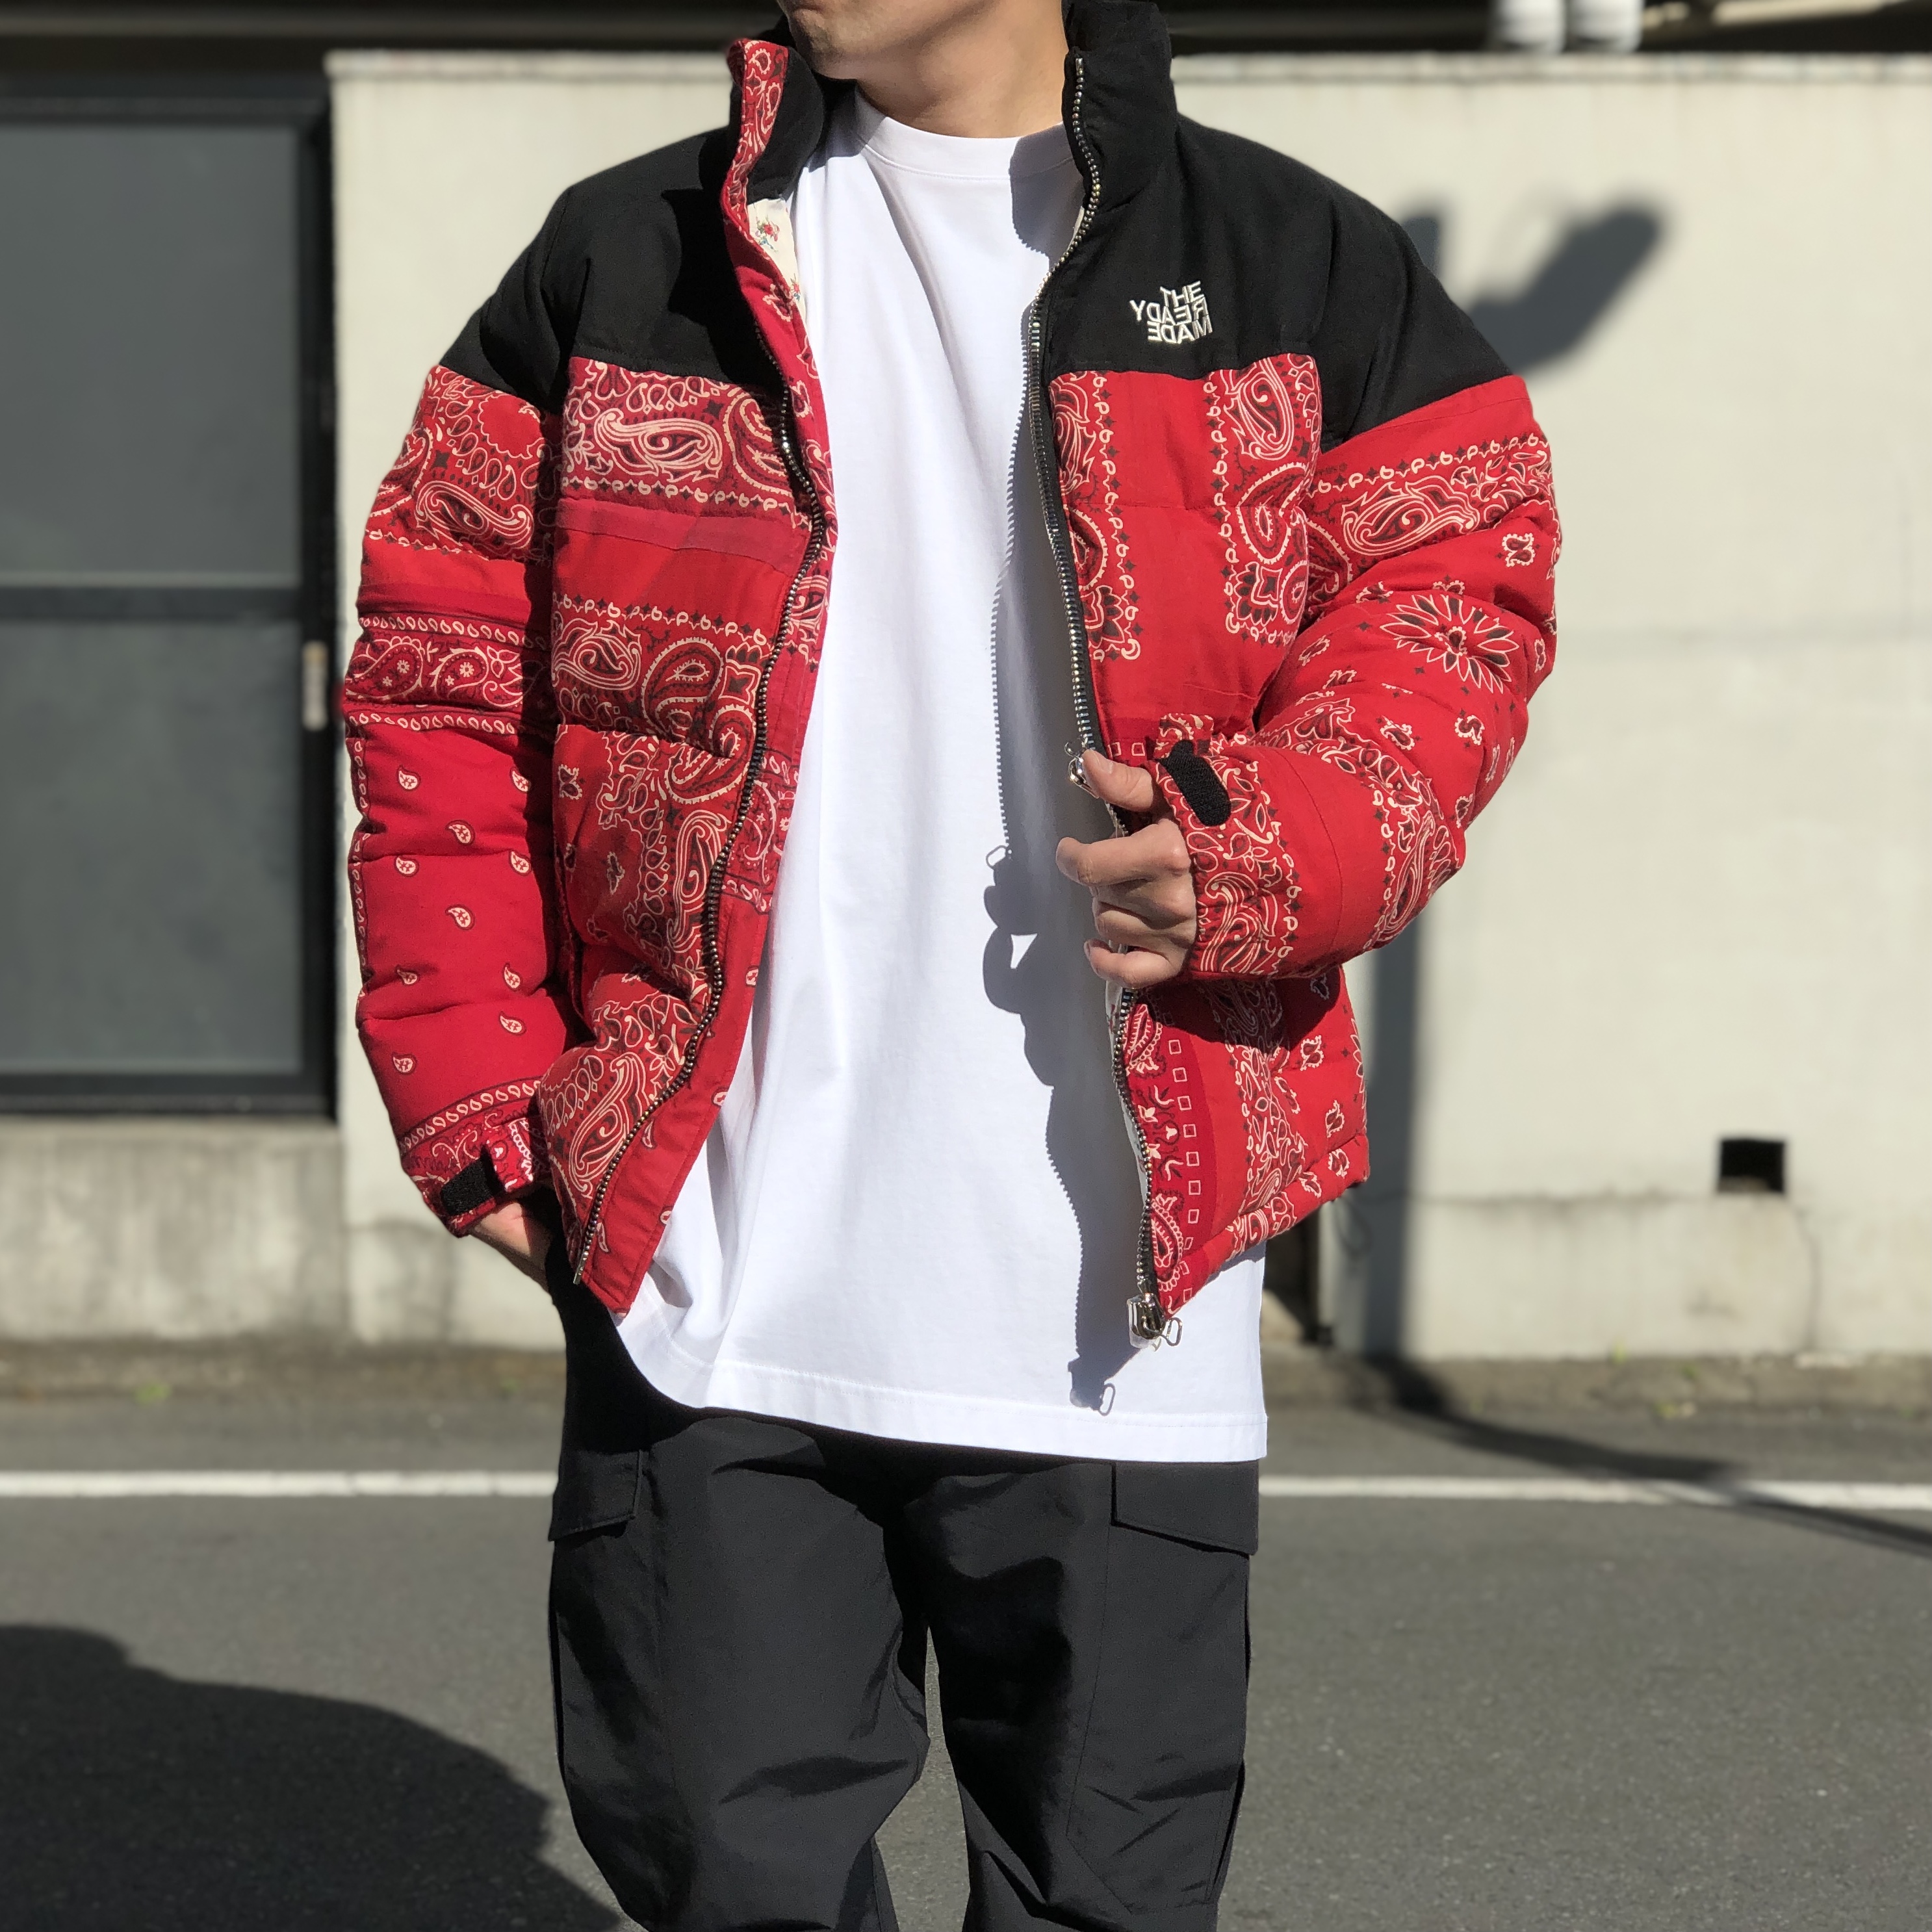 gele Glimte defile rollin' Mito on X: "＃READYMADE "BANDANA DOWN JACKET” ///now available  In-store &amp; Online/// https://t.co/lKA0k3FccK 先日のフリースに続き、本日、READYMADE の最新作となる"BANDANA DOWN JACKET"がリリース。 https://t.co/62SeqVwD9f" / X